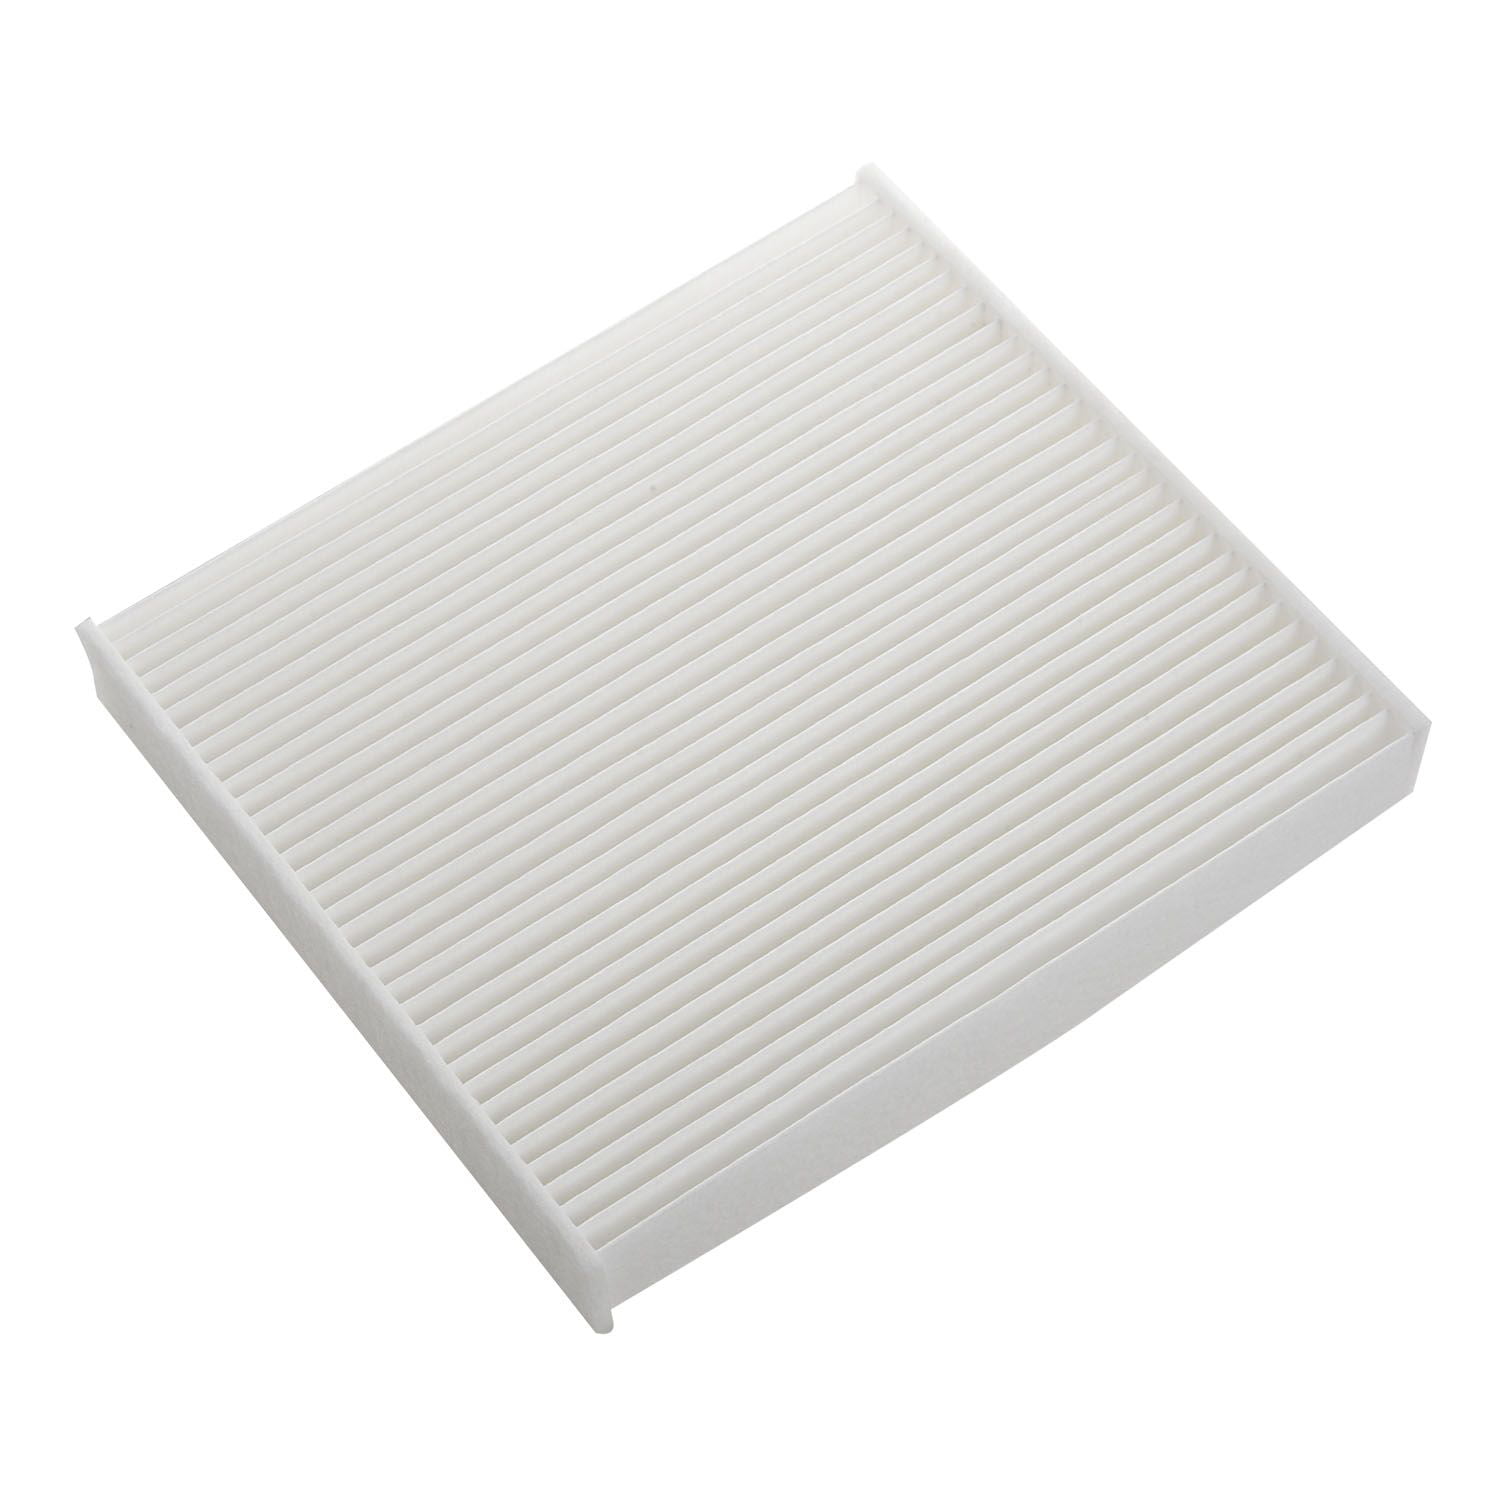 A/C CABIN AIR FILTER 87139-YZZ20 87139-YZZ08 Fit for Toyota Camry Lexus 